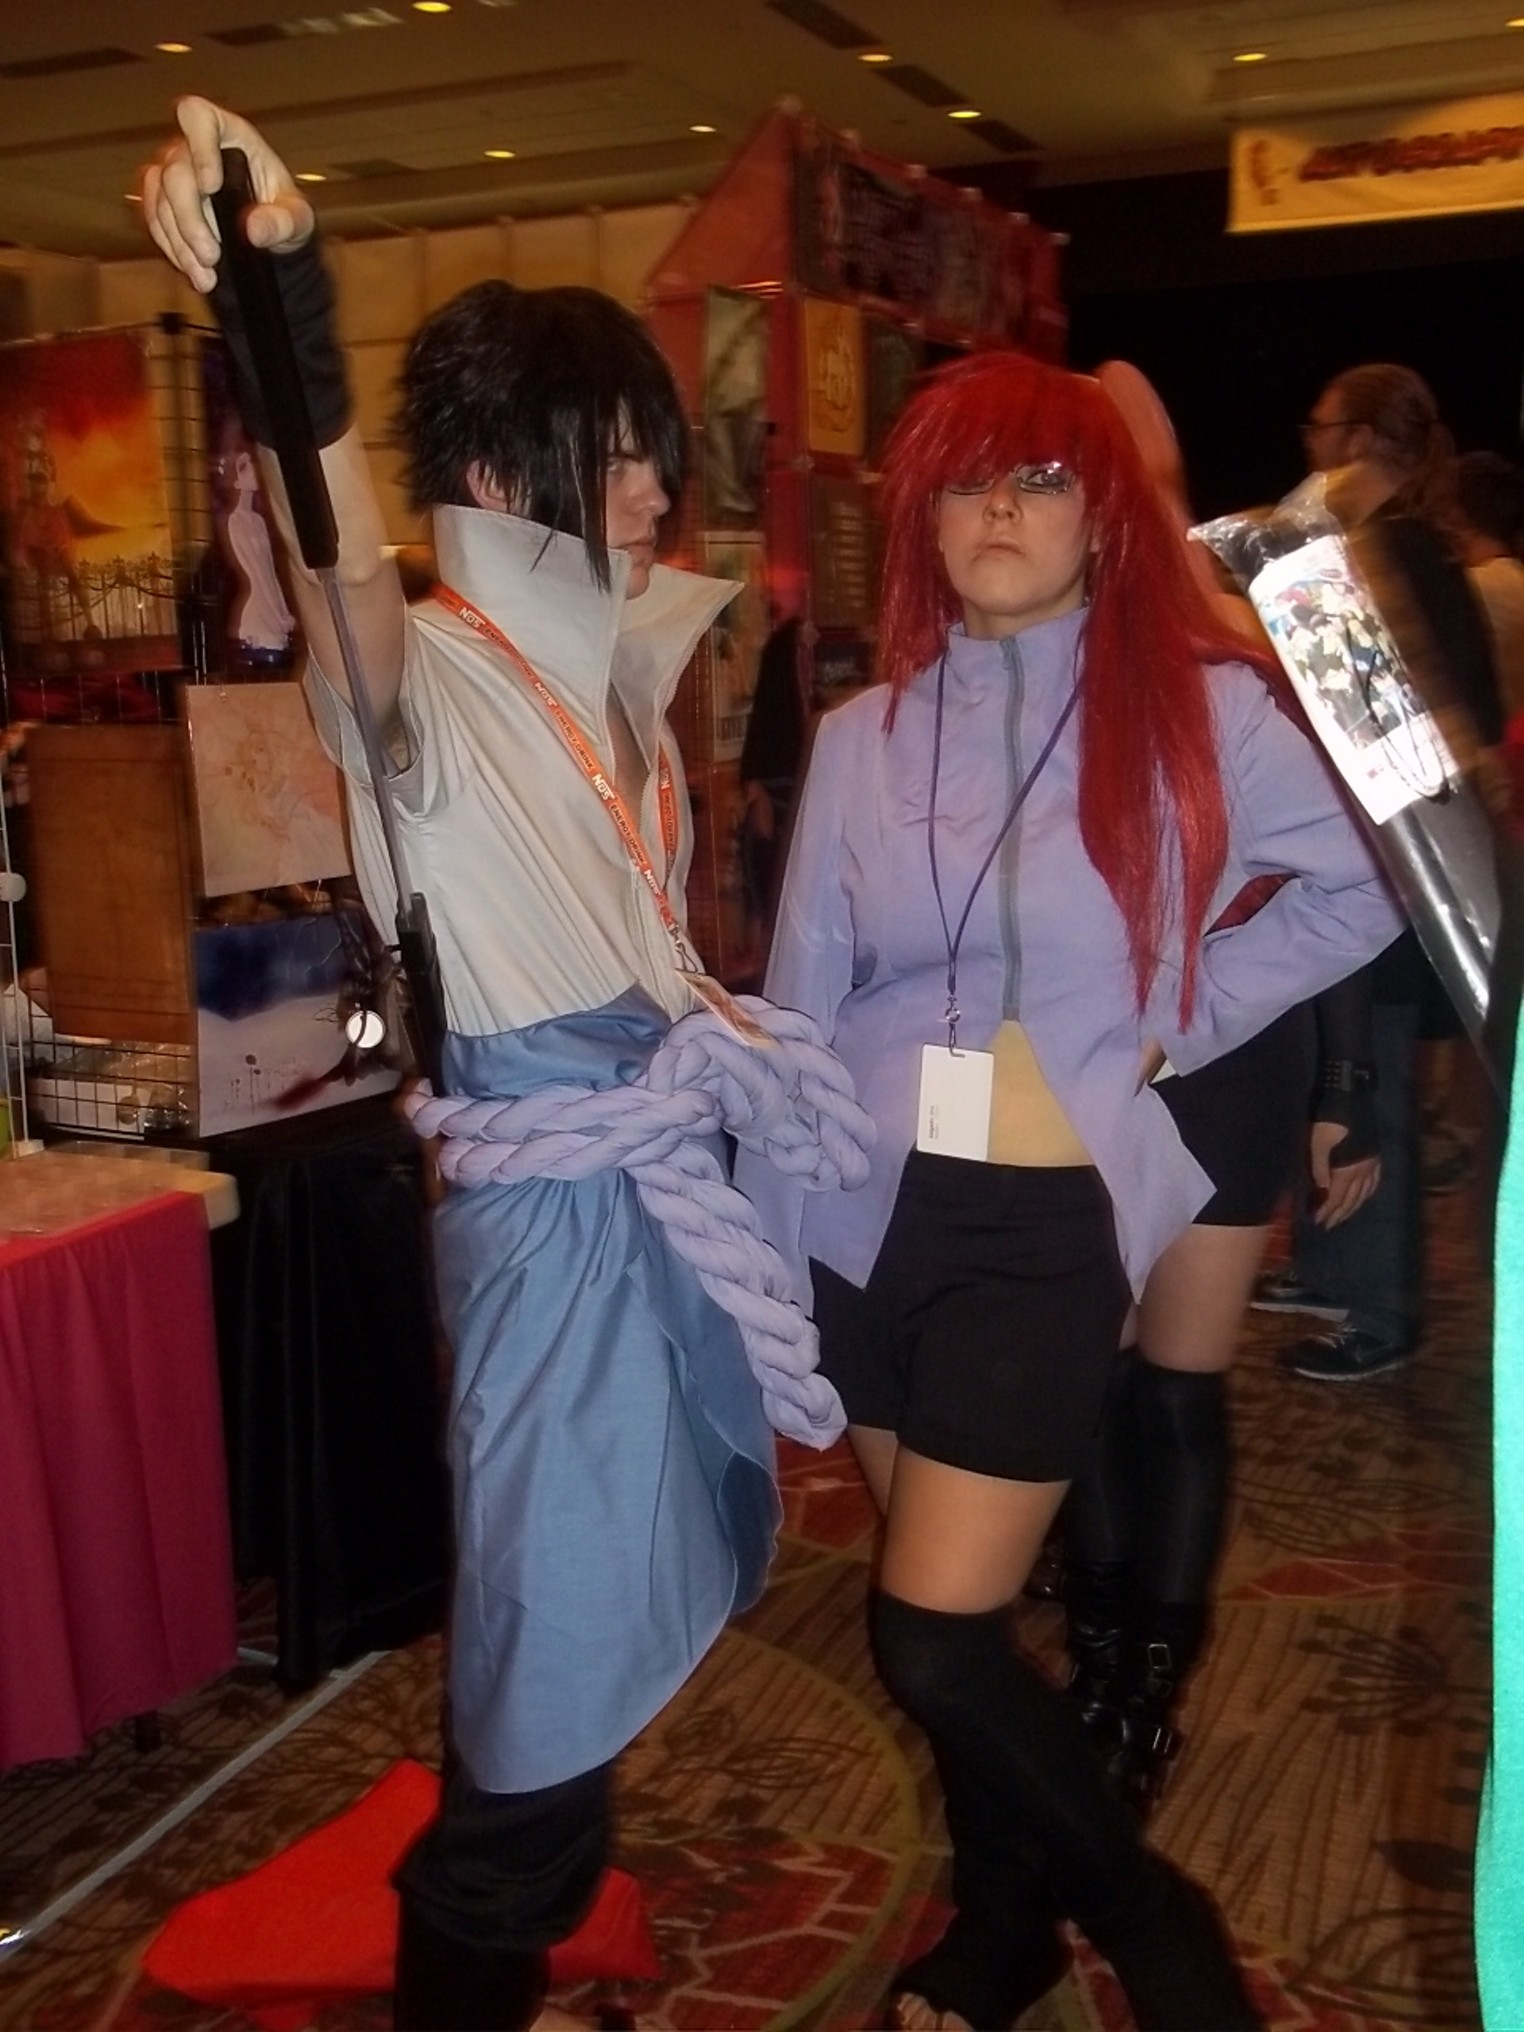 Akon Anime Convention  Dallas  Dallas Observer  The Leading Independent  News Source in Dallas Texas